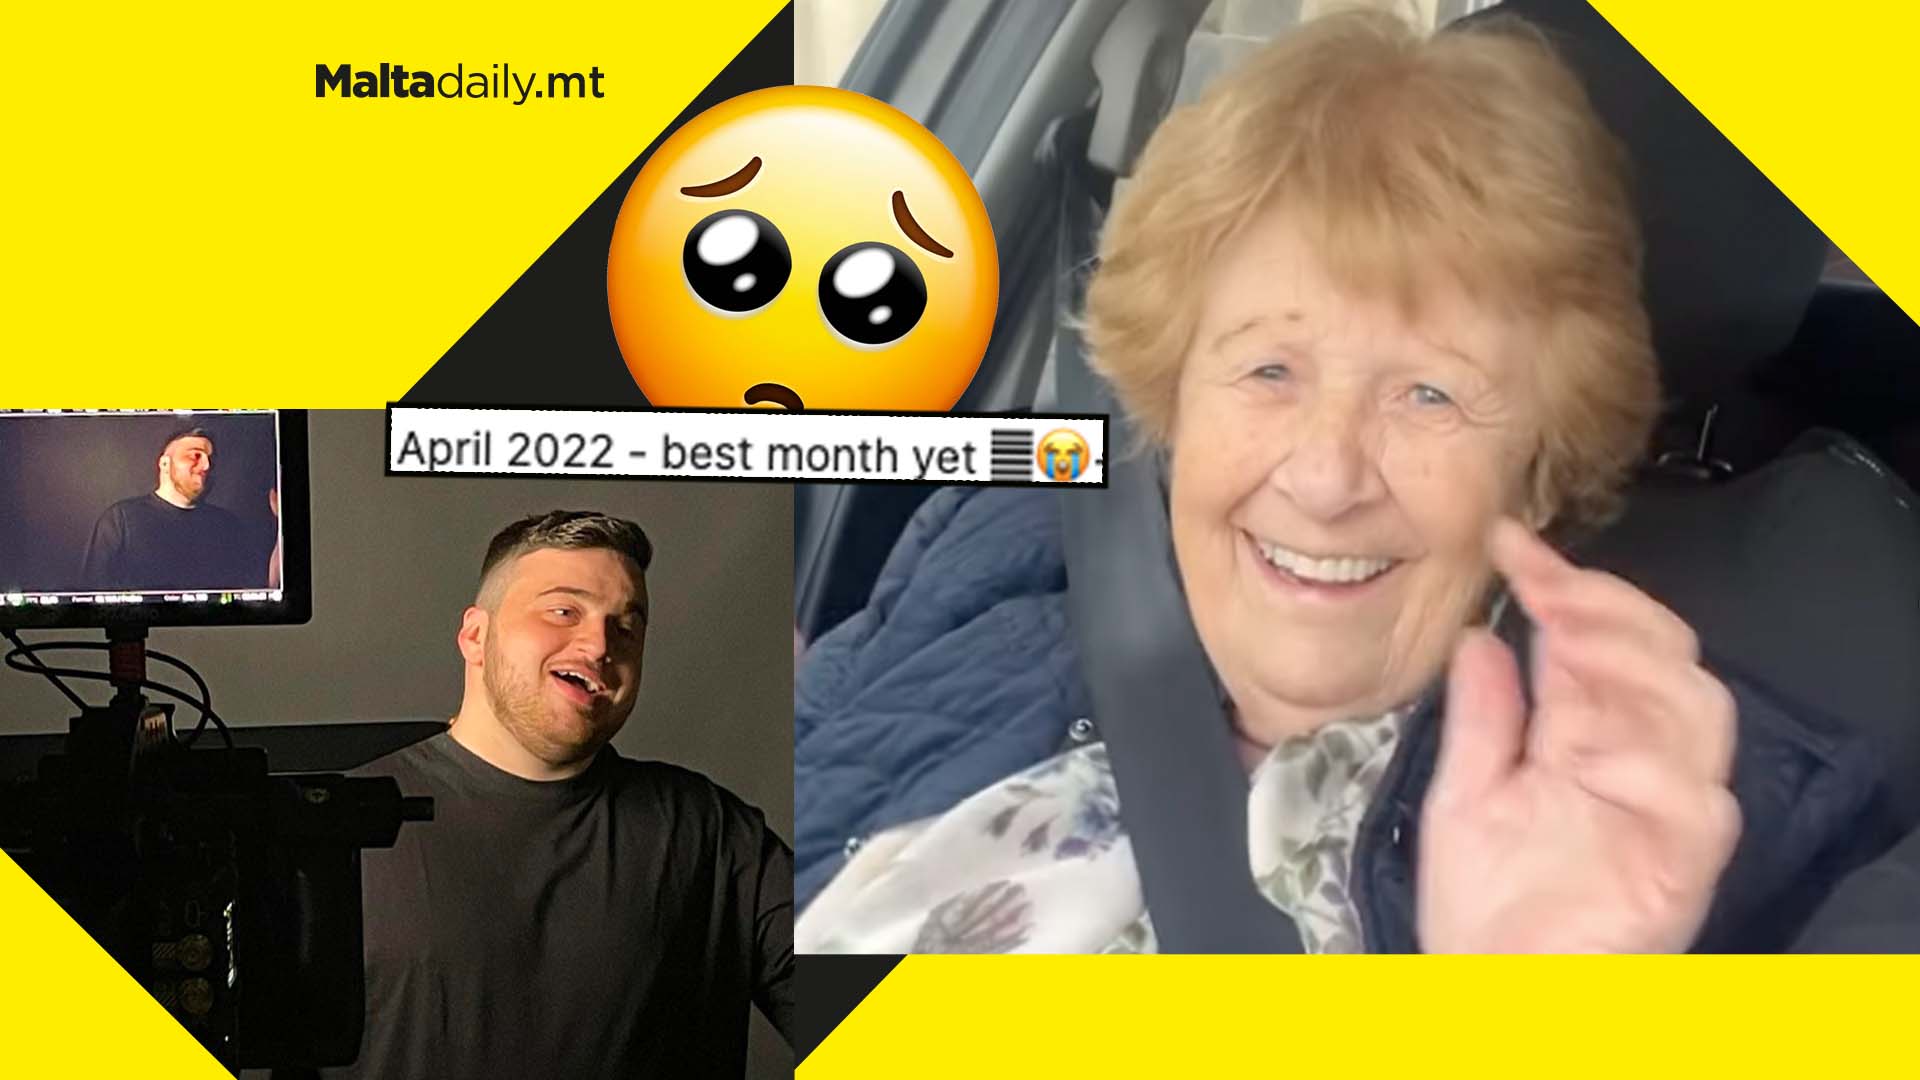 Shaun Farrugia’s grandma reacting to his song with Martin Garrix is pure goals